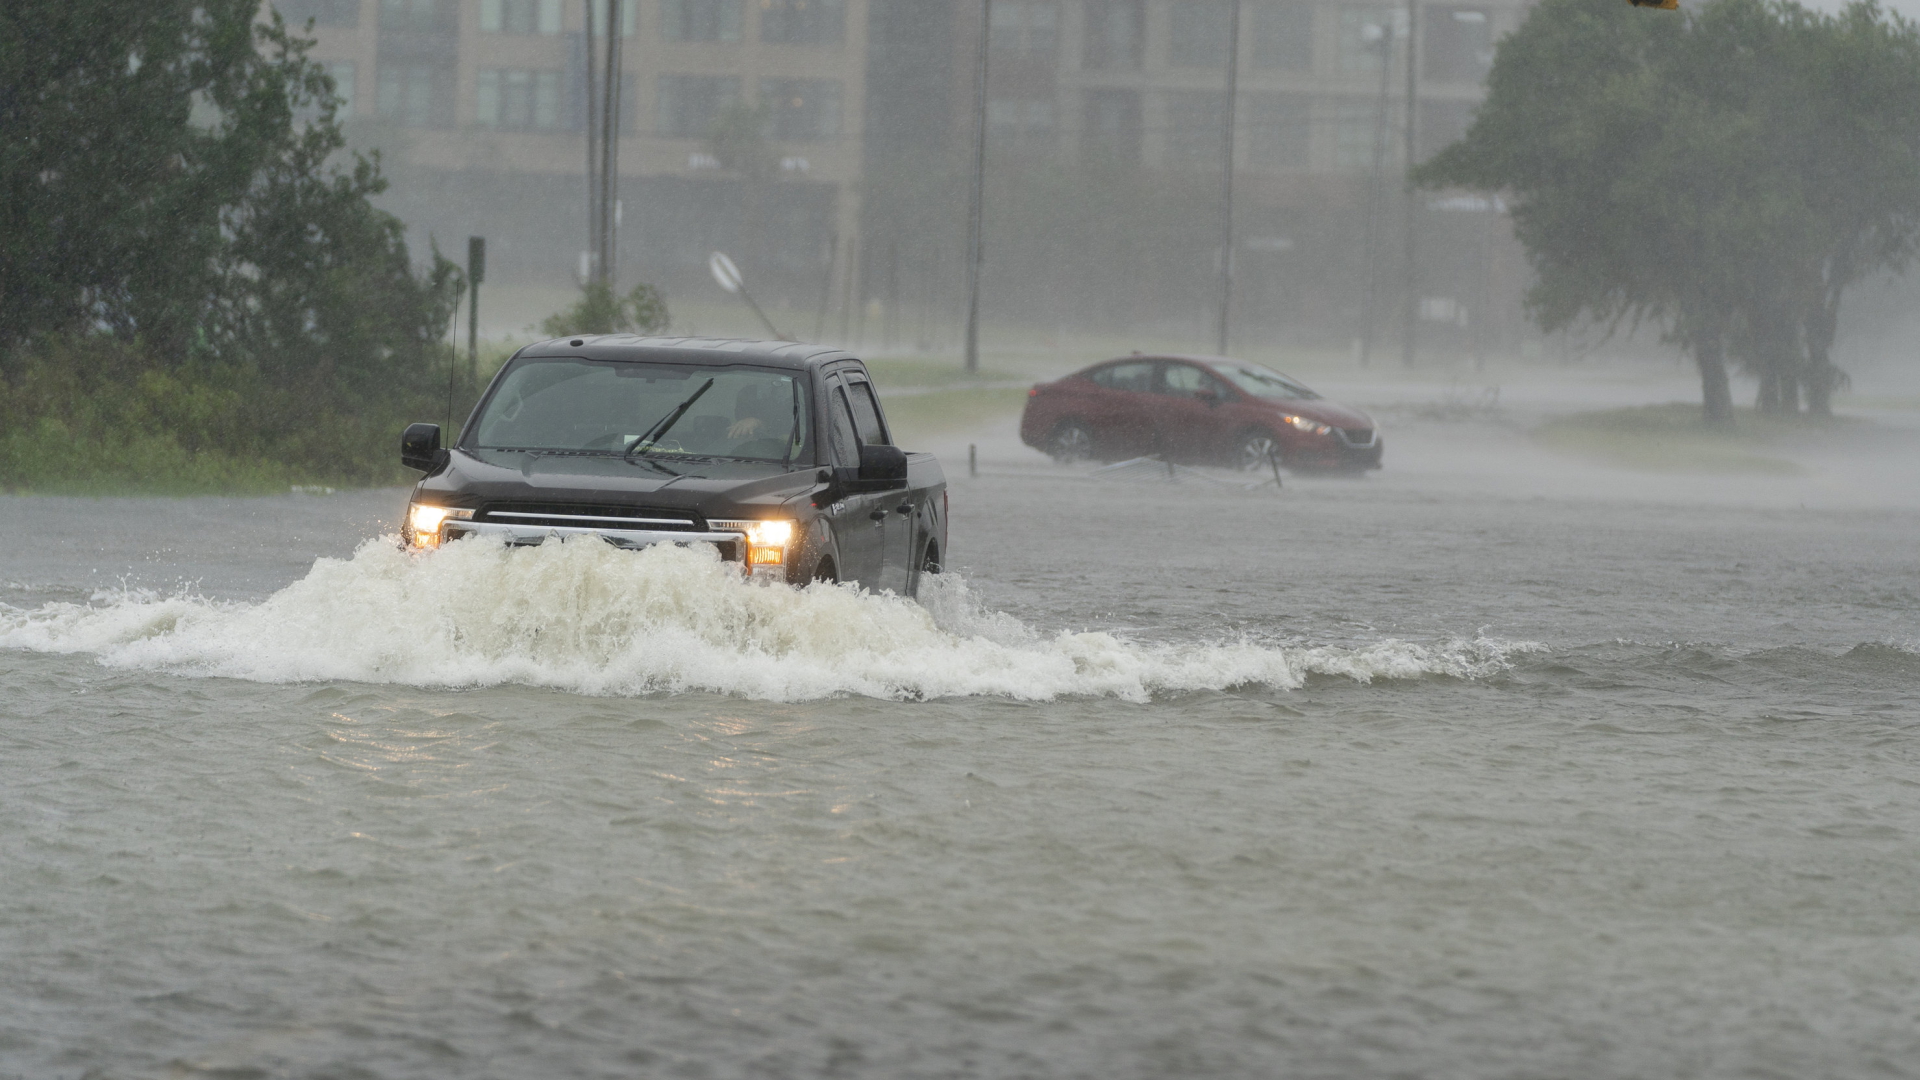 Second time in the US: Hurricane hits South Carolina